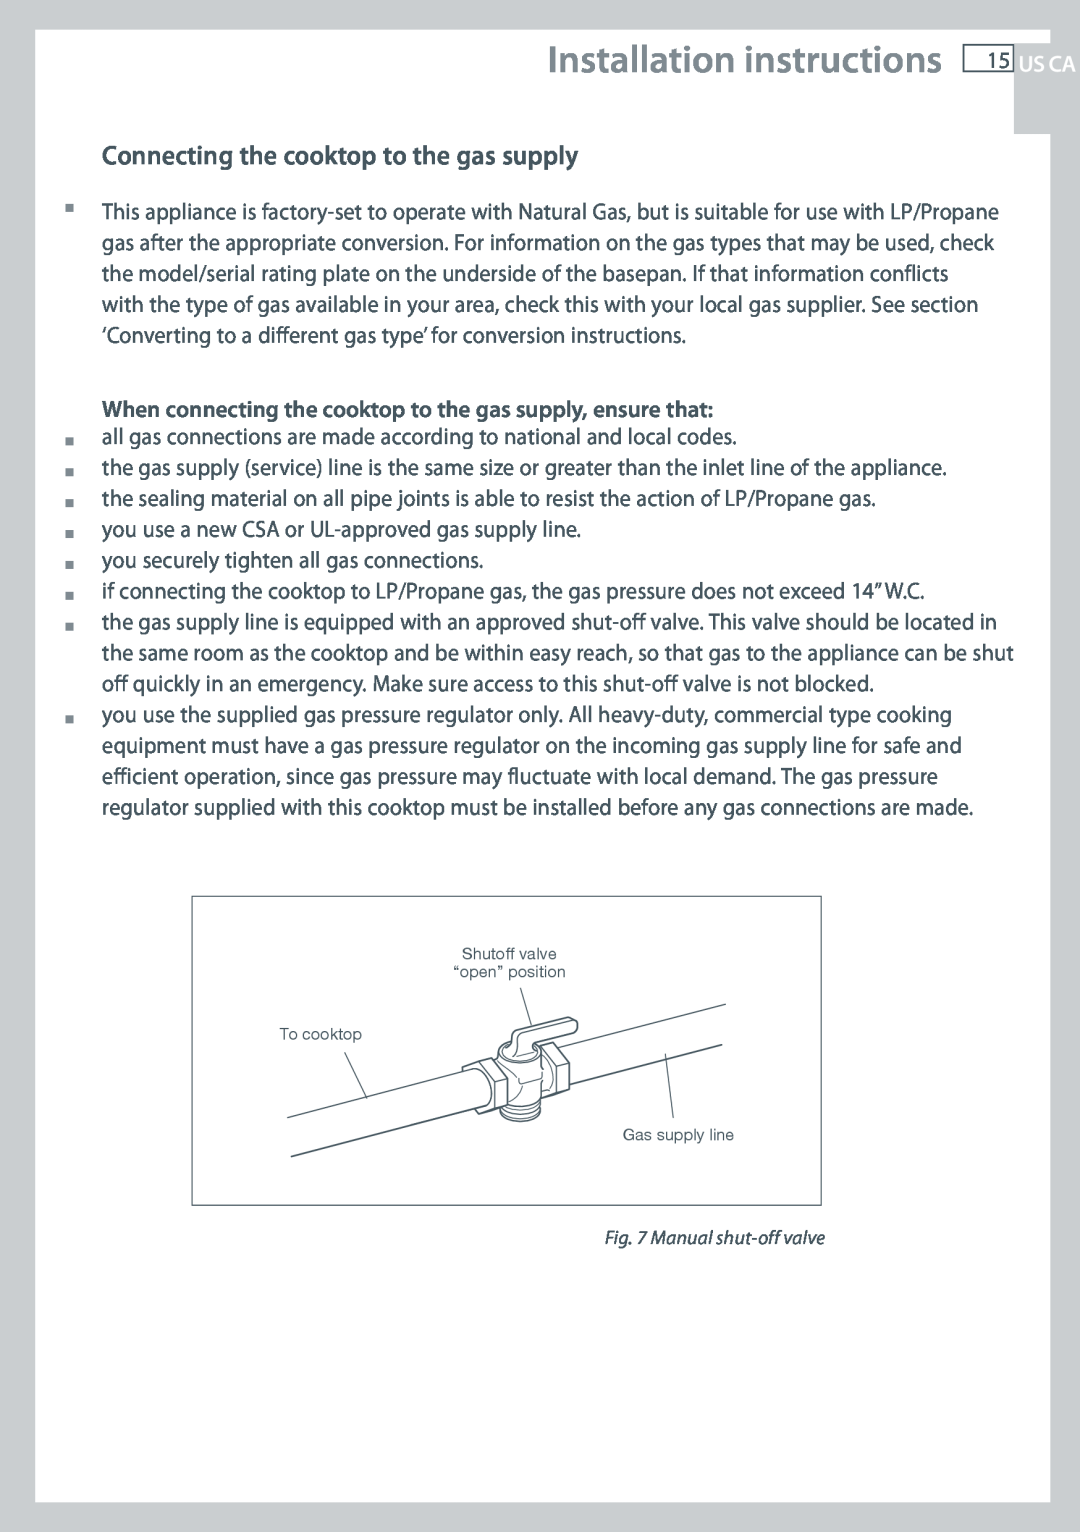 Fisher & Paykel CG122, CG244 Installation instructions, Connecting the cooktop to the gas supply, Manual shut-offvalve 